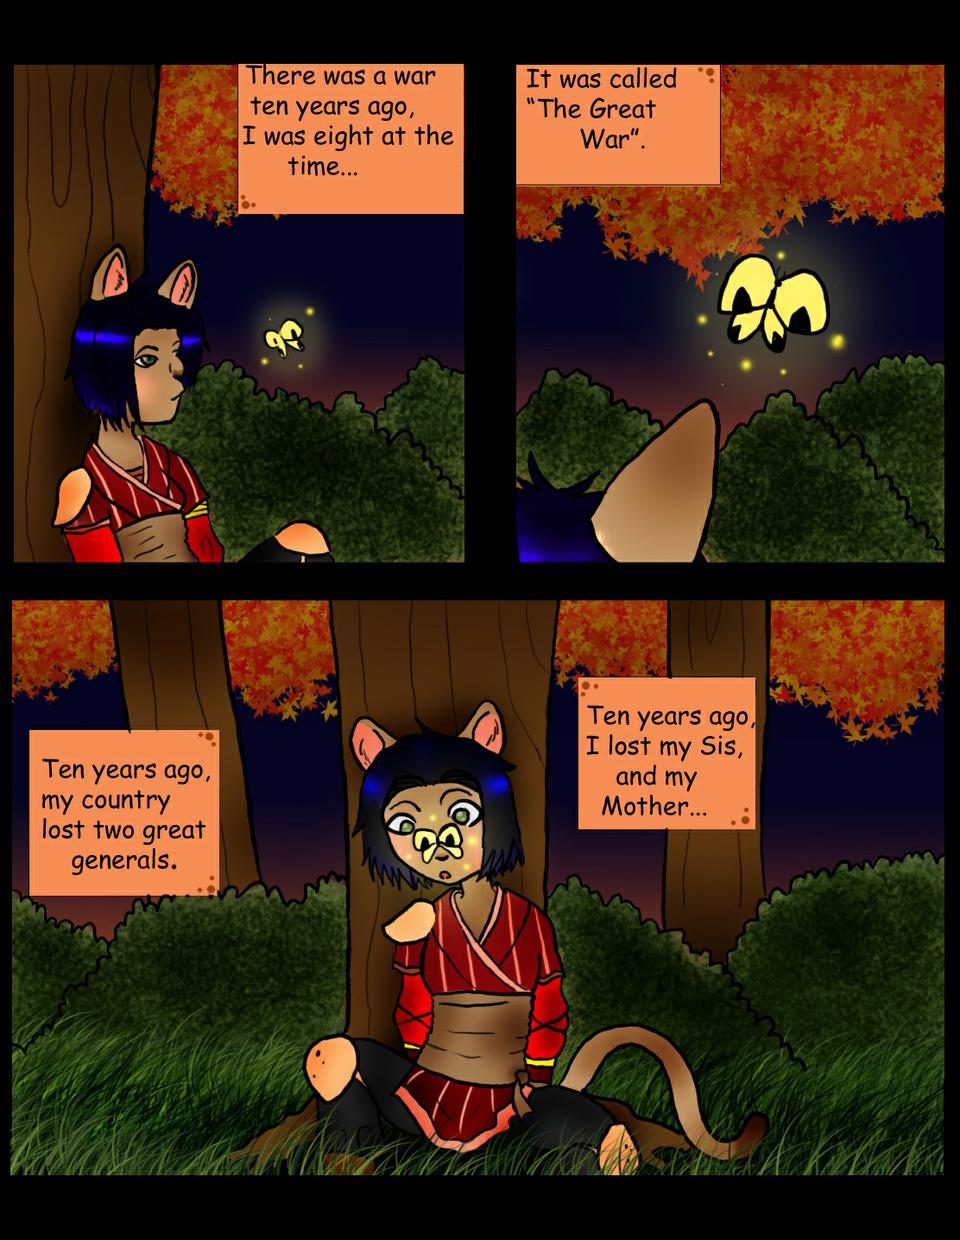 Chapter 1 Page 2